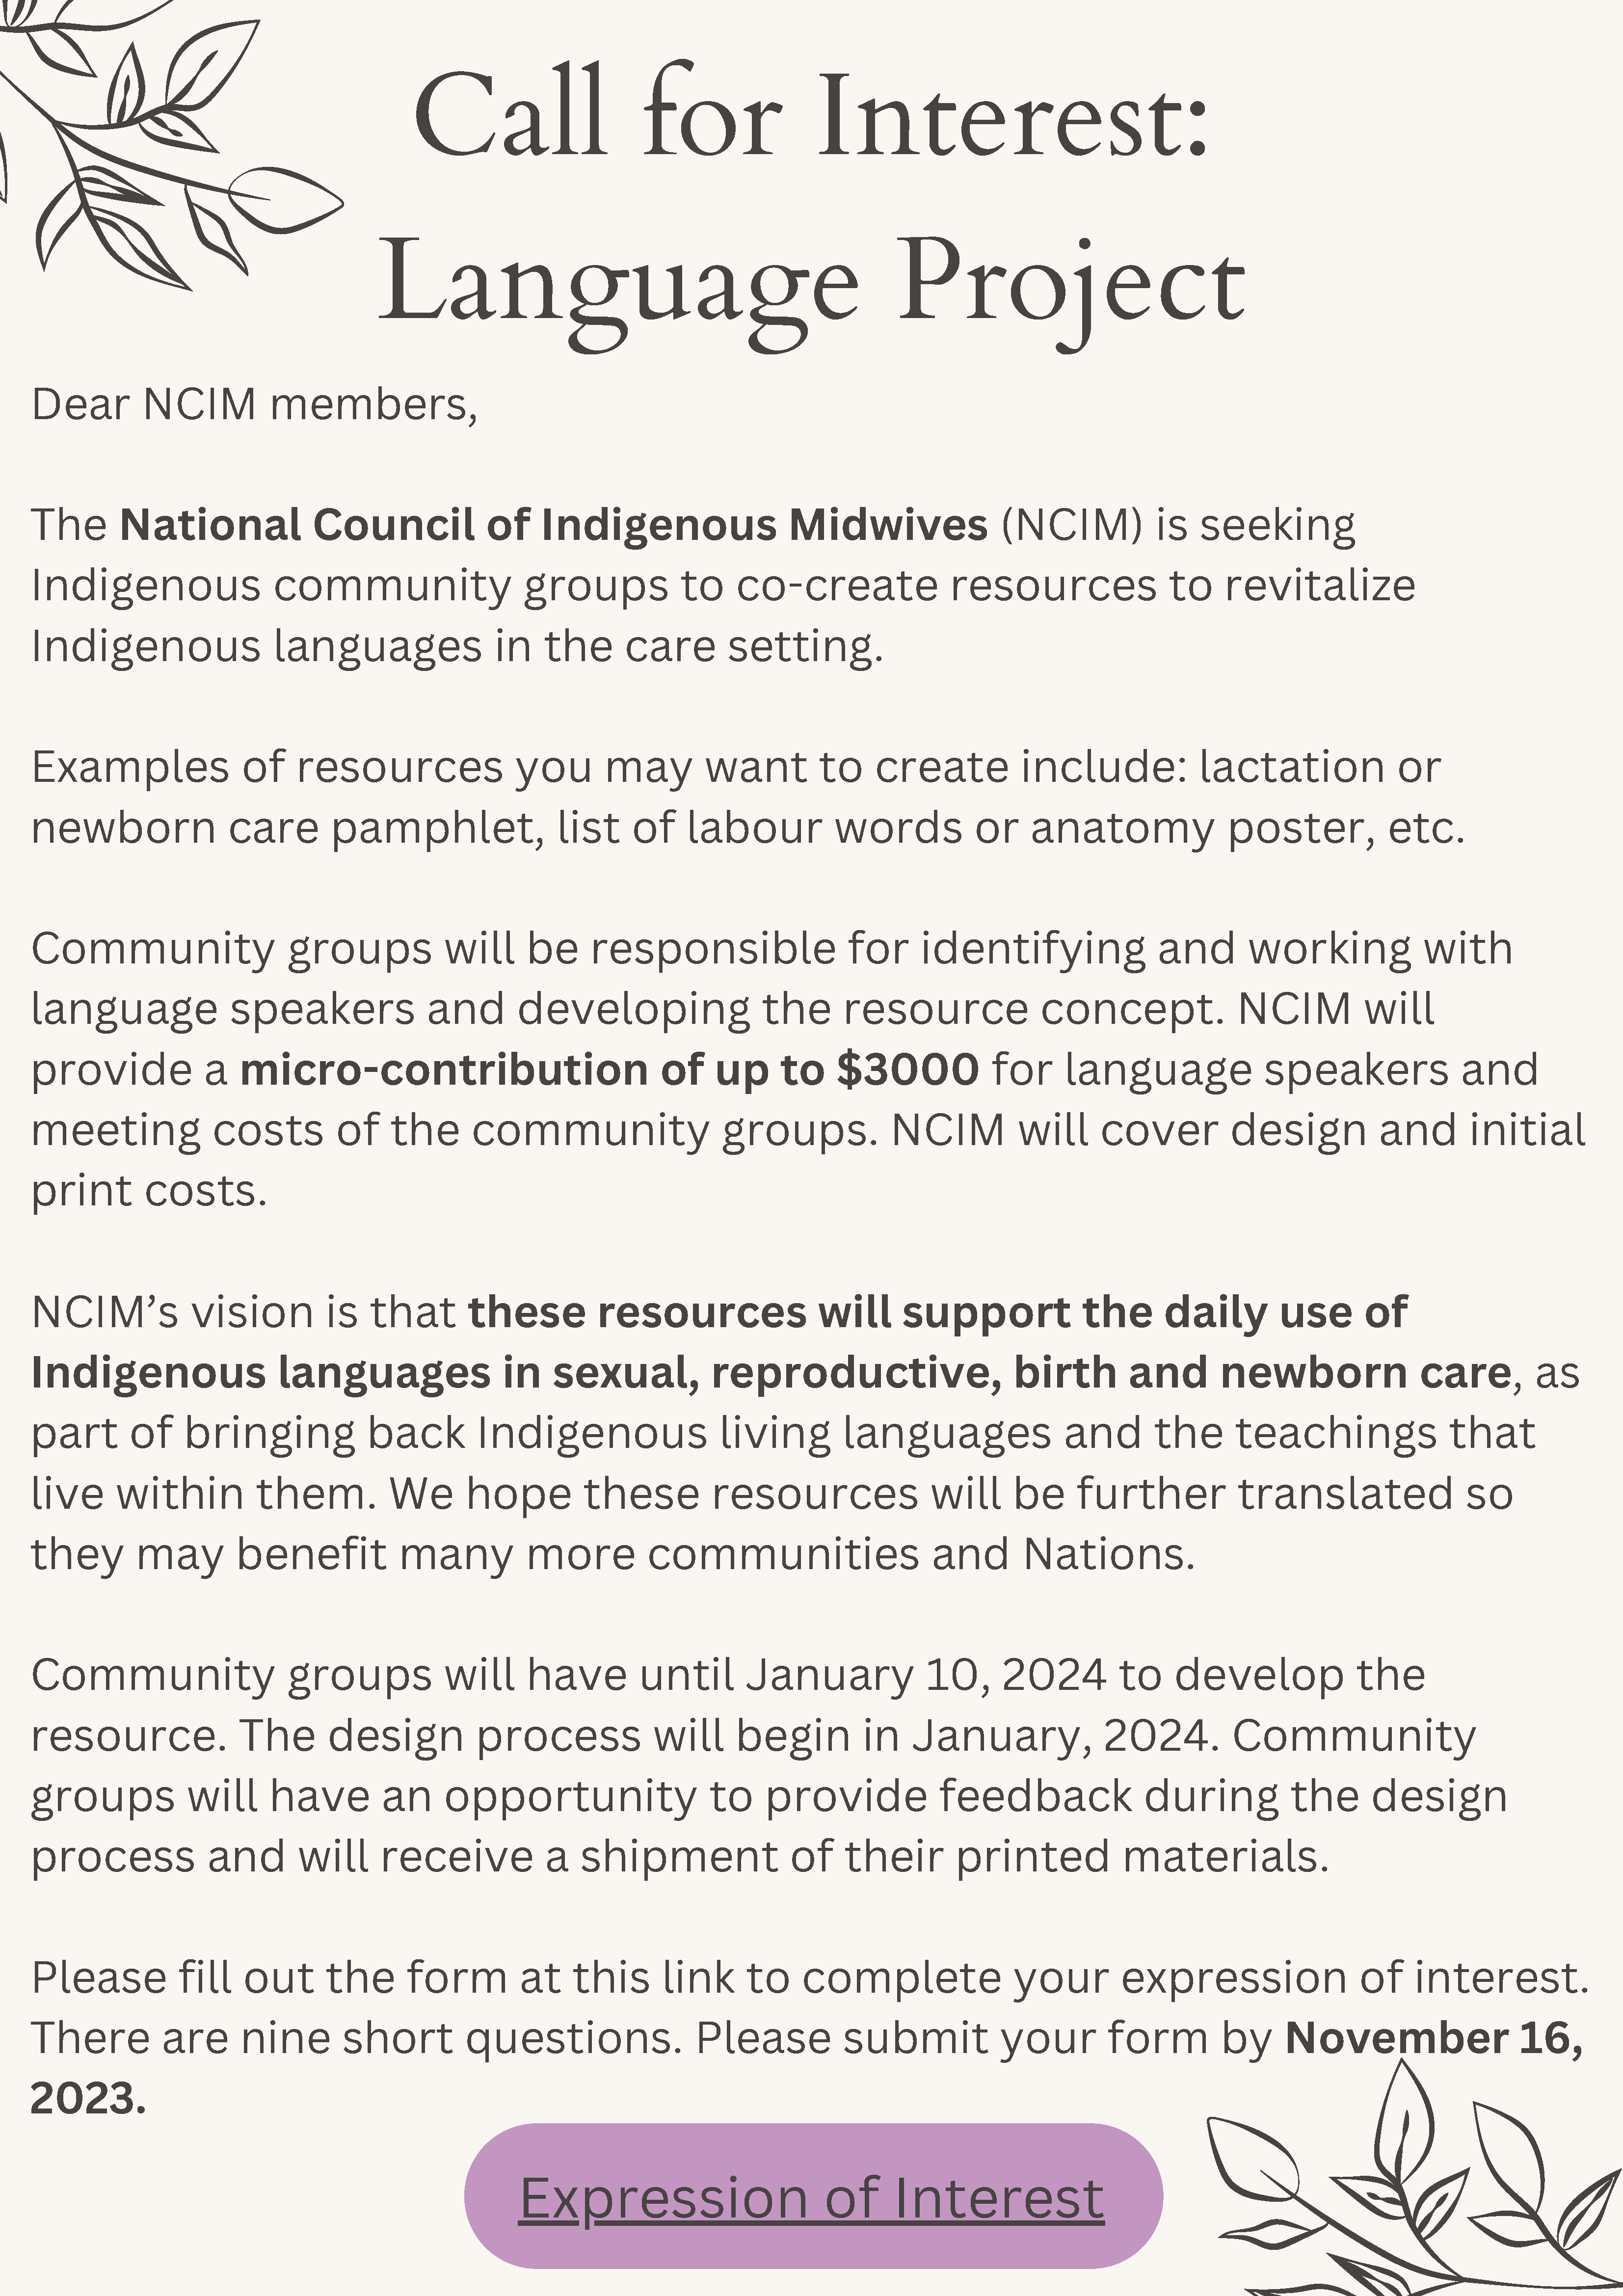 Tan background with black text Call for Interest: Language Project Dear NCIM members, The National Council of Indigenous Midwives (NCIM) is seeking Indigenous community groups to co-create resources to revitalize Indigenous languages in the care setting. Examples of resources you may want to create include: lactation or newborn care pamphlet, list of labour words or anatomy poster, etc. Community groups will be responsible for identifying and working with language speakers and developing the resource concept. NCIM will provide a micro-contribution of up to $3000 for language speakers and meeting costs of the community groups. NCIM will cover design and initial print costs. NCIM’s vision is that these resources will support the daily use of Indigenous languages in sexual, reproductive, birth and newborn care, as part of bringing back Indigenous living languages and the teachings that live within them. We hope these resources will be further translated so they may benefit many more communities and Nations. Community groups will have until January 10, 2024 to develop the resource. The design process will begin in January, 2024. Community groups will have an opportunity to provide feedback during the design process and will receive a shipment of their printed materials. Please fill out the form at this link to complete your expression of interest. There are nine short questions. Please submit your form by November 16, 2023.